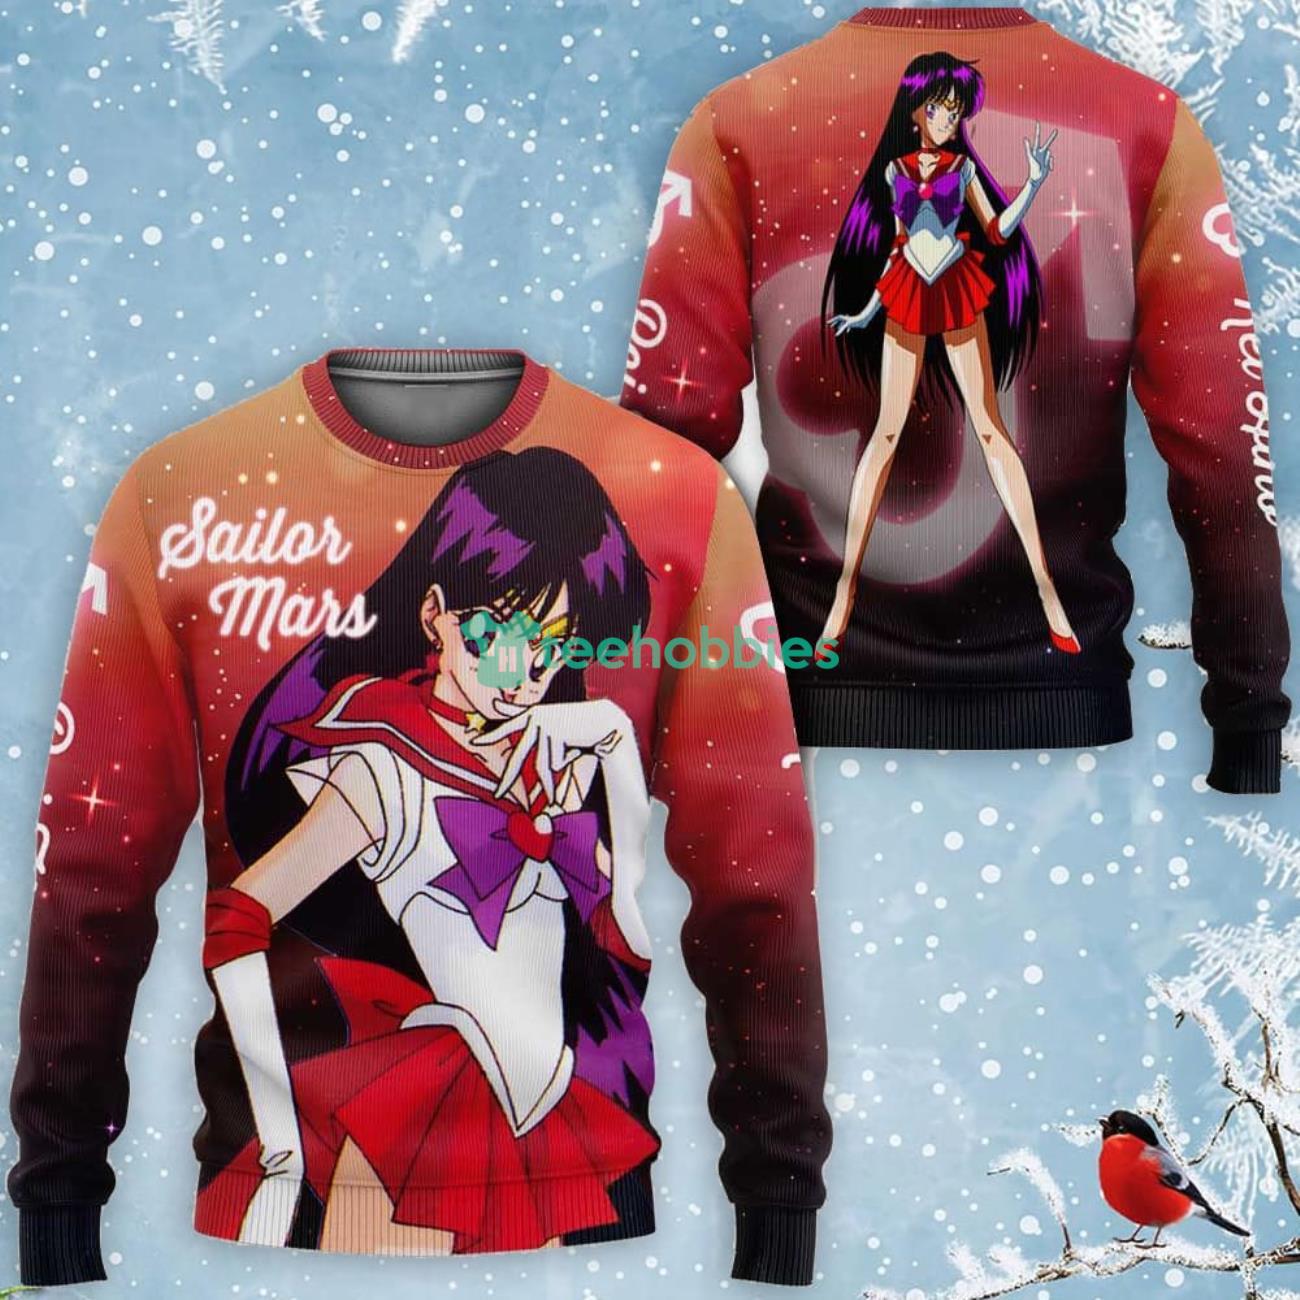 Sailor Mars Rei Hino All Over Printed 3D Shirt Sailor Moon Anime Fans Product Photo 2 Product photo 2